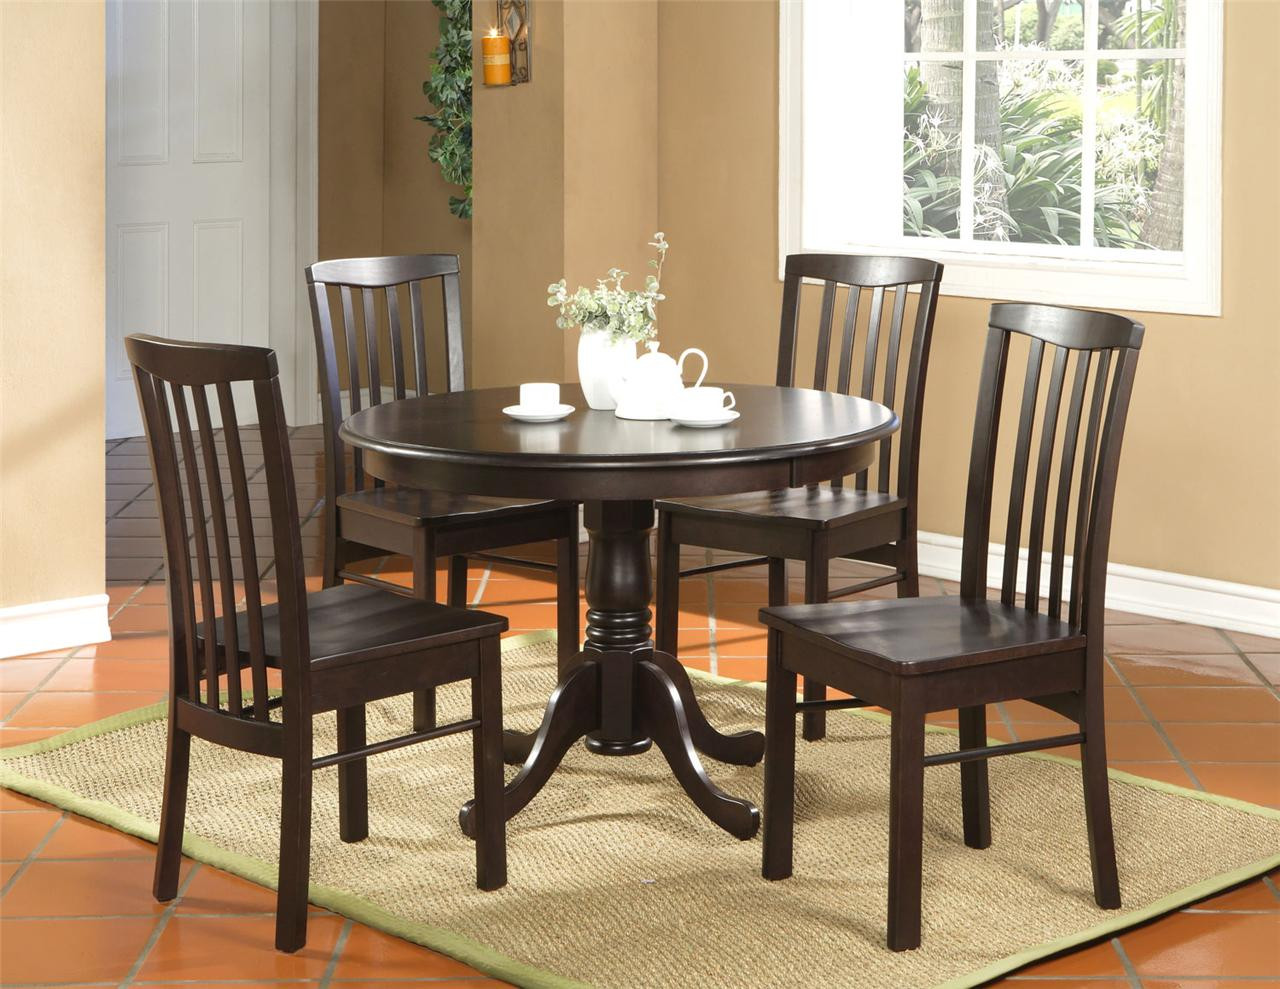 Small Kitchen Dinette Sets
 5PC ROUND KITCHEN DINETTE SET TABLE AND 4 CHAIRS WALNUT